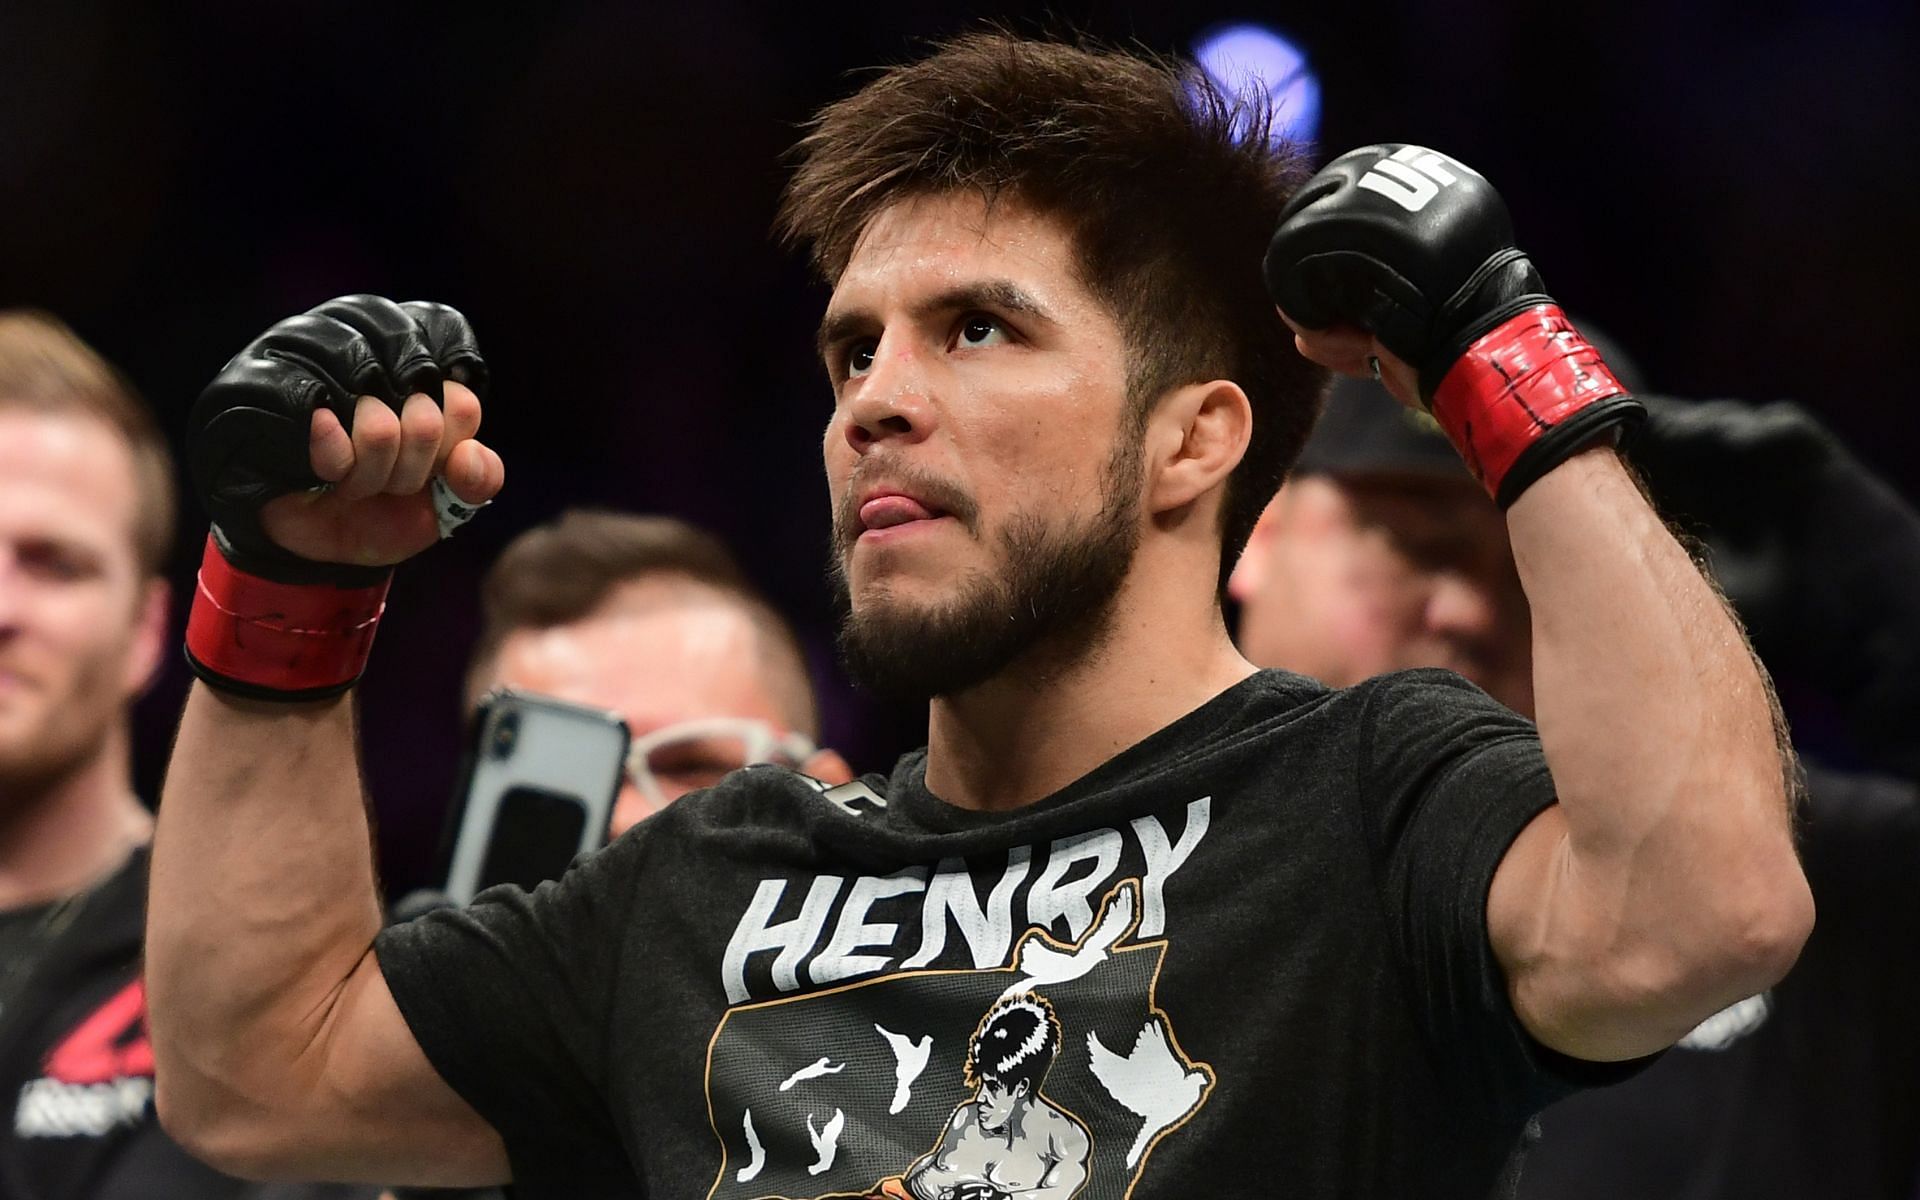 Former UFC flyweight and bantamweight champion Henry Cejudo reacts after a win